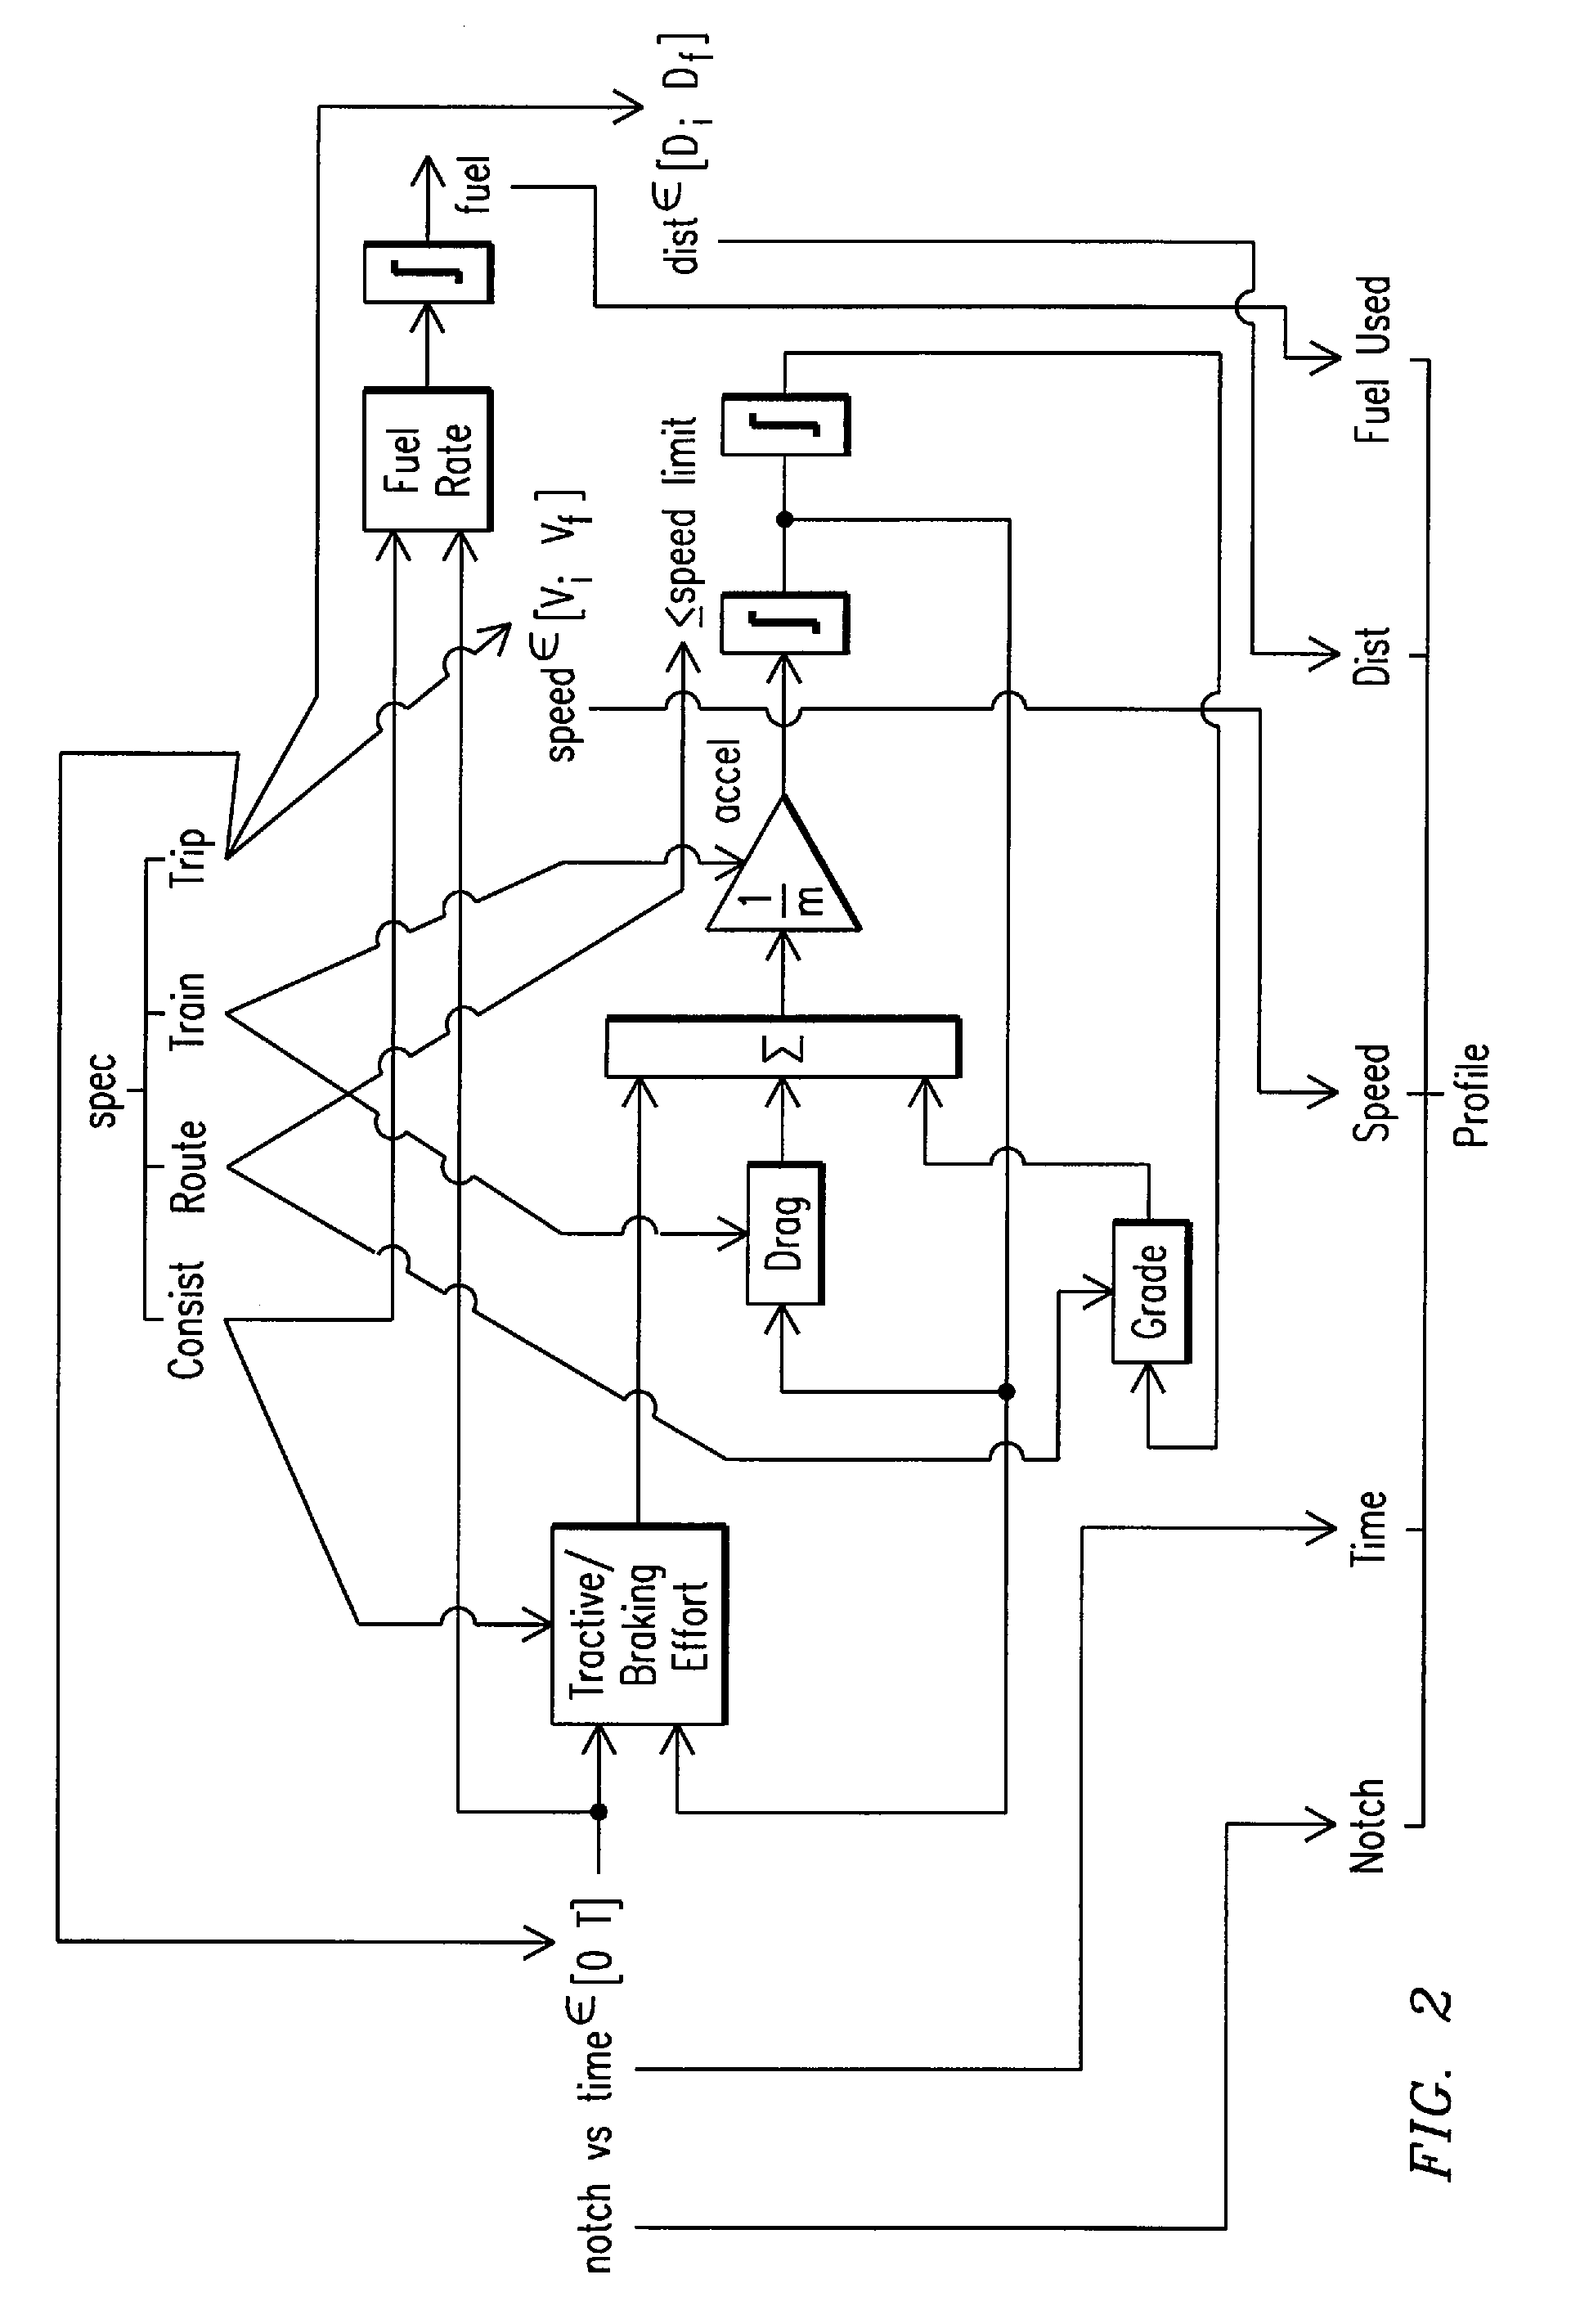 System, Method and Computer Software Code for Optimizing Train Operations Considering Rail Car Parameters